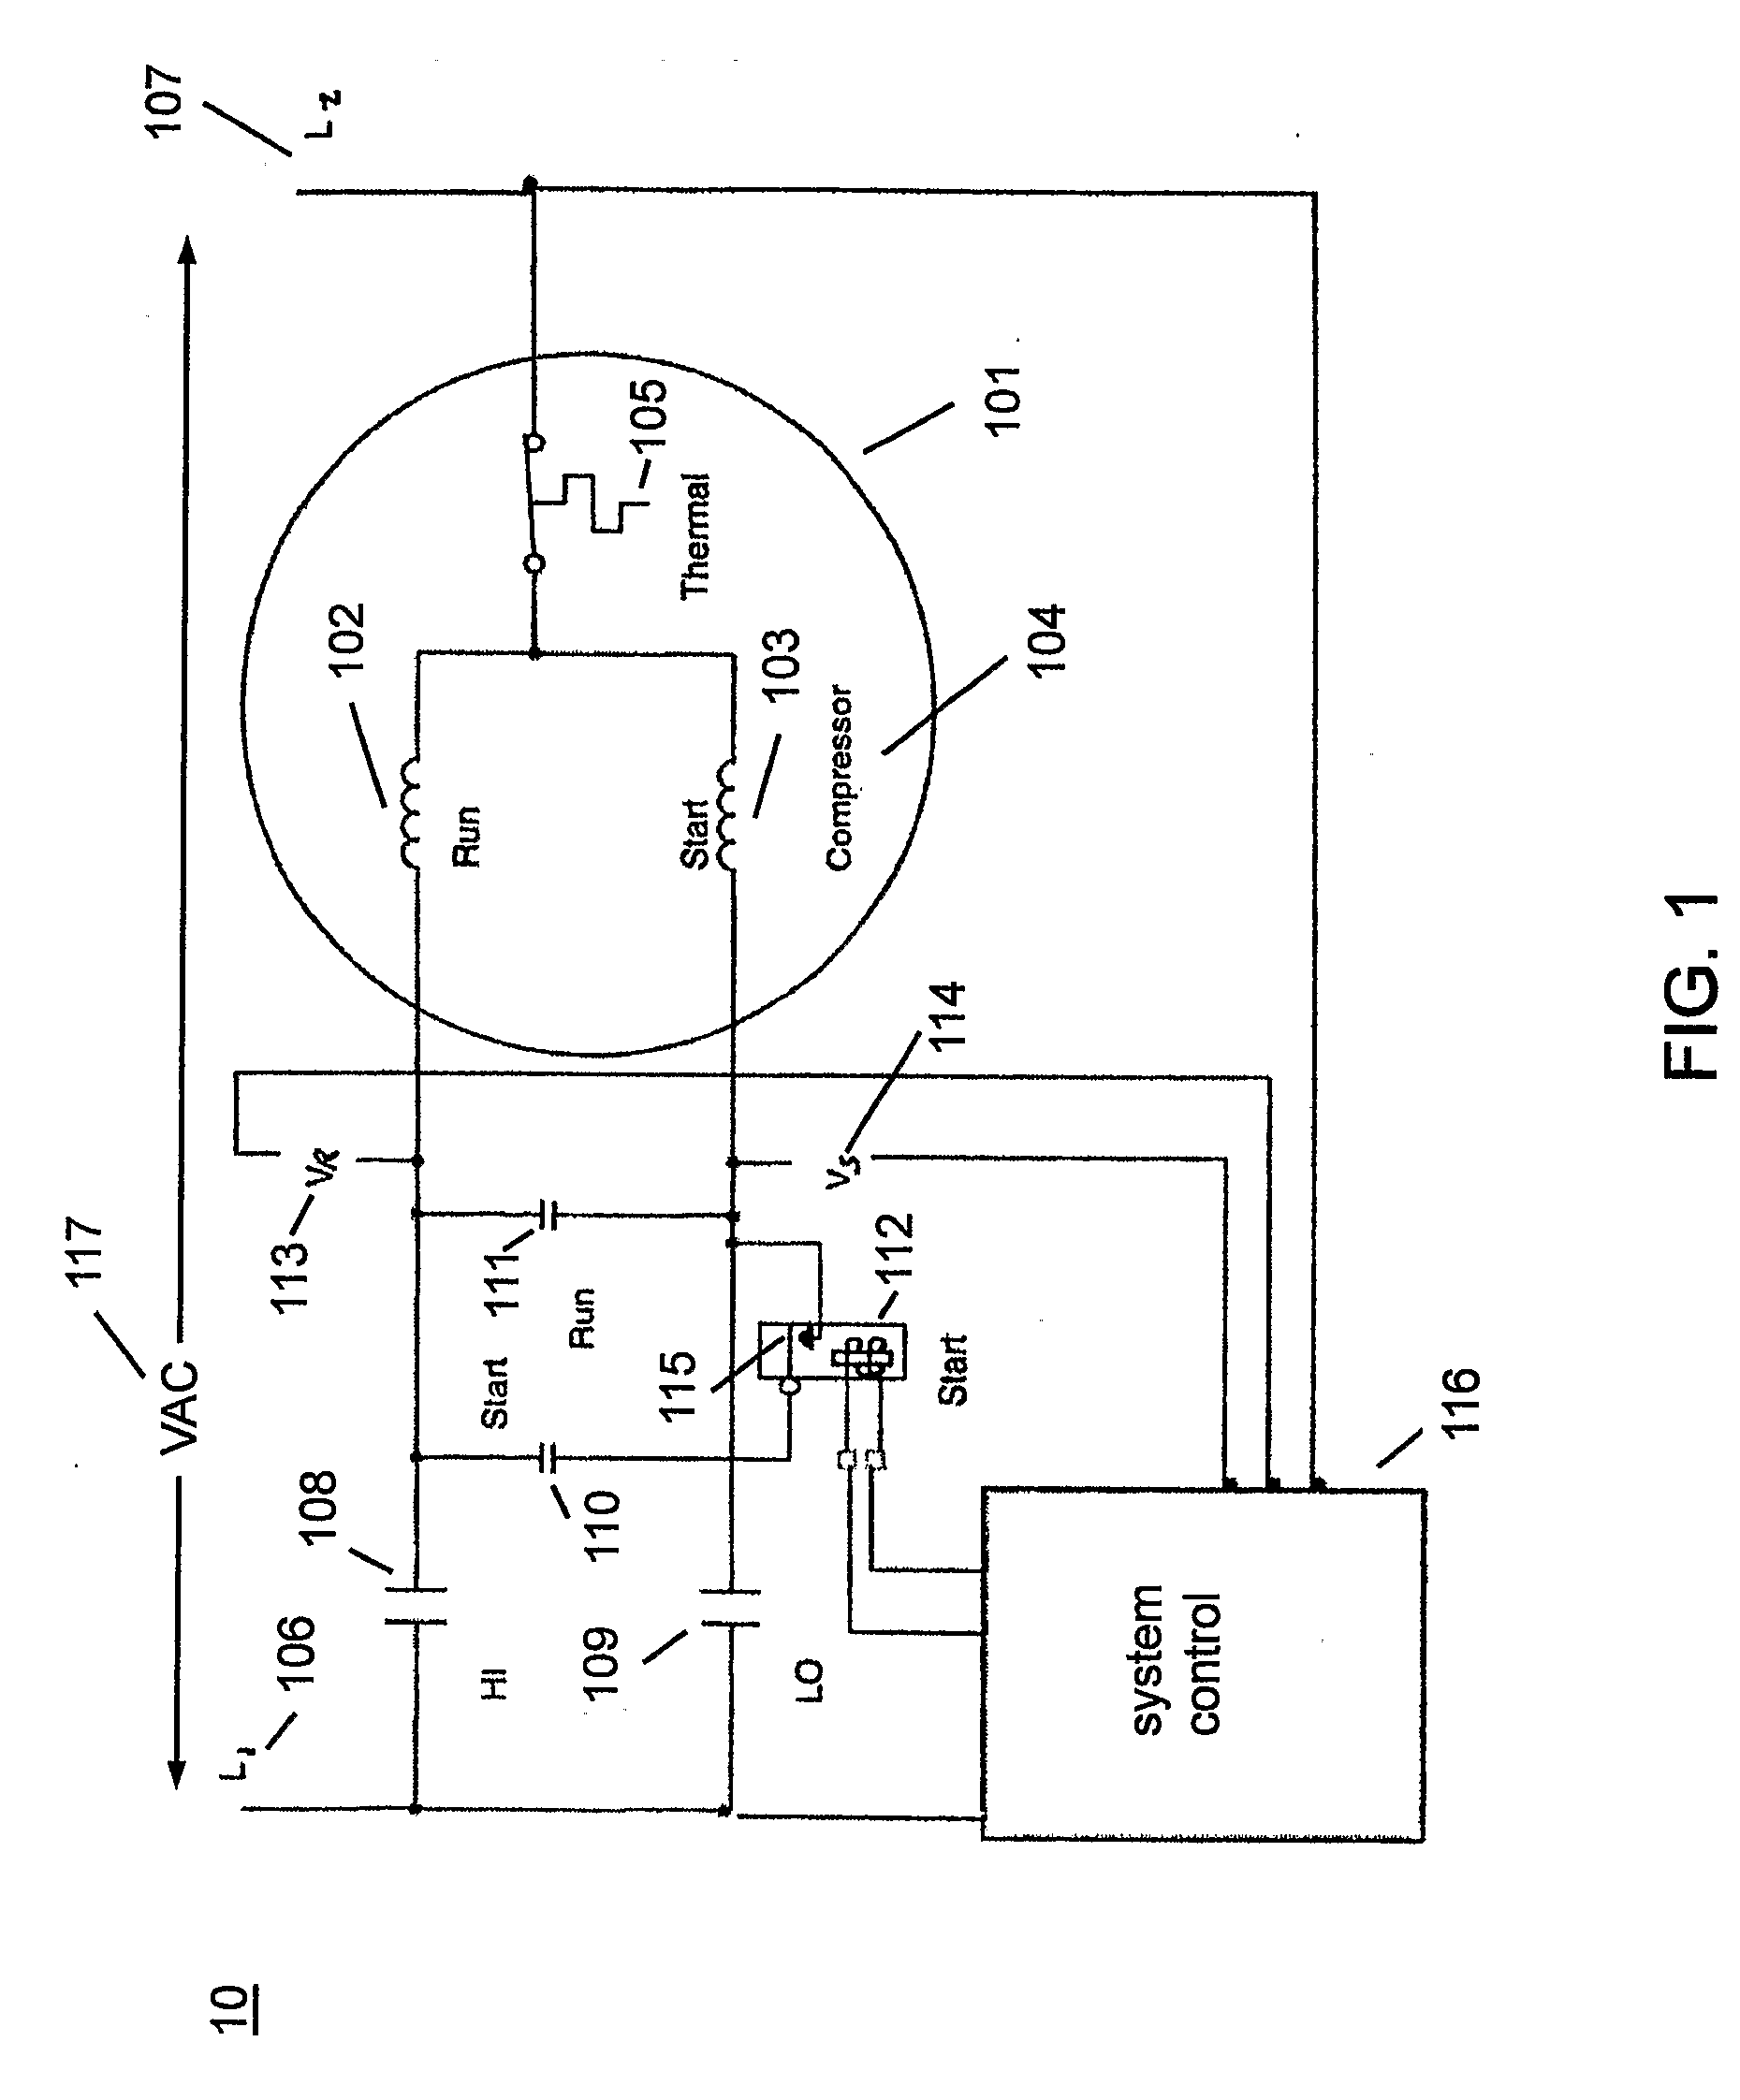 Electronic Method for Starting a Compressor